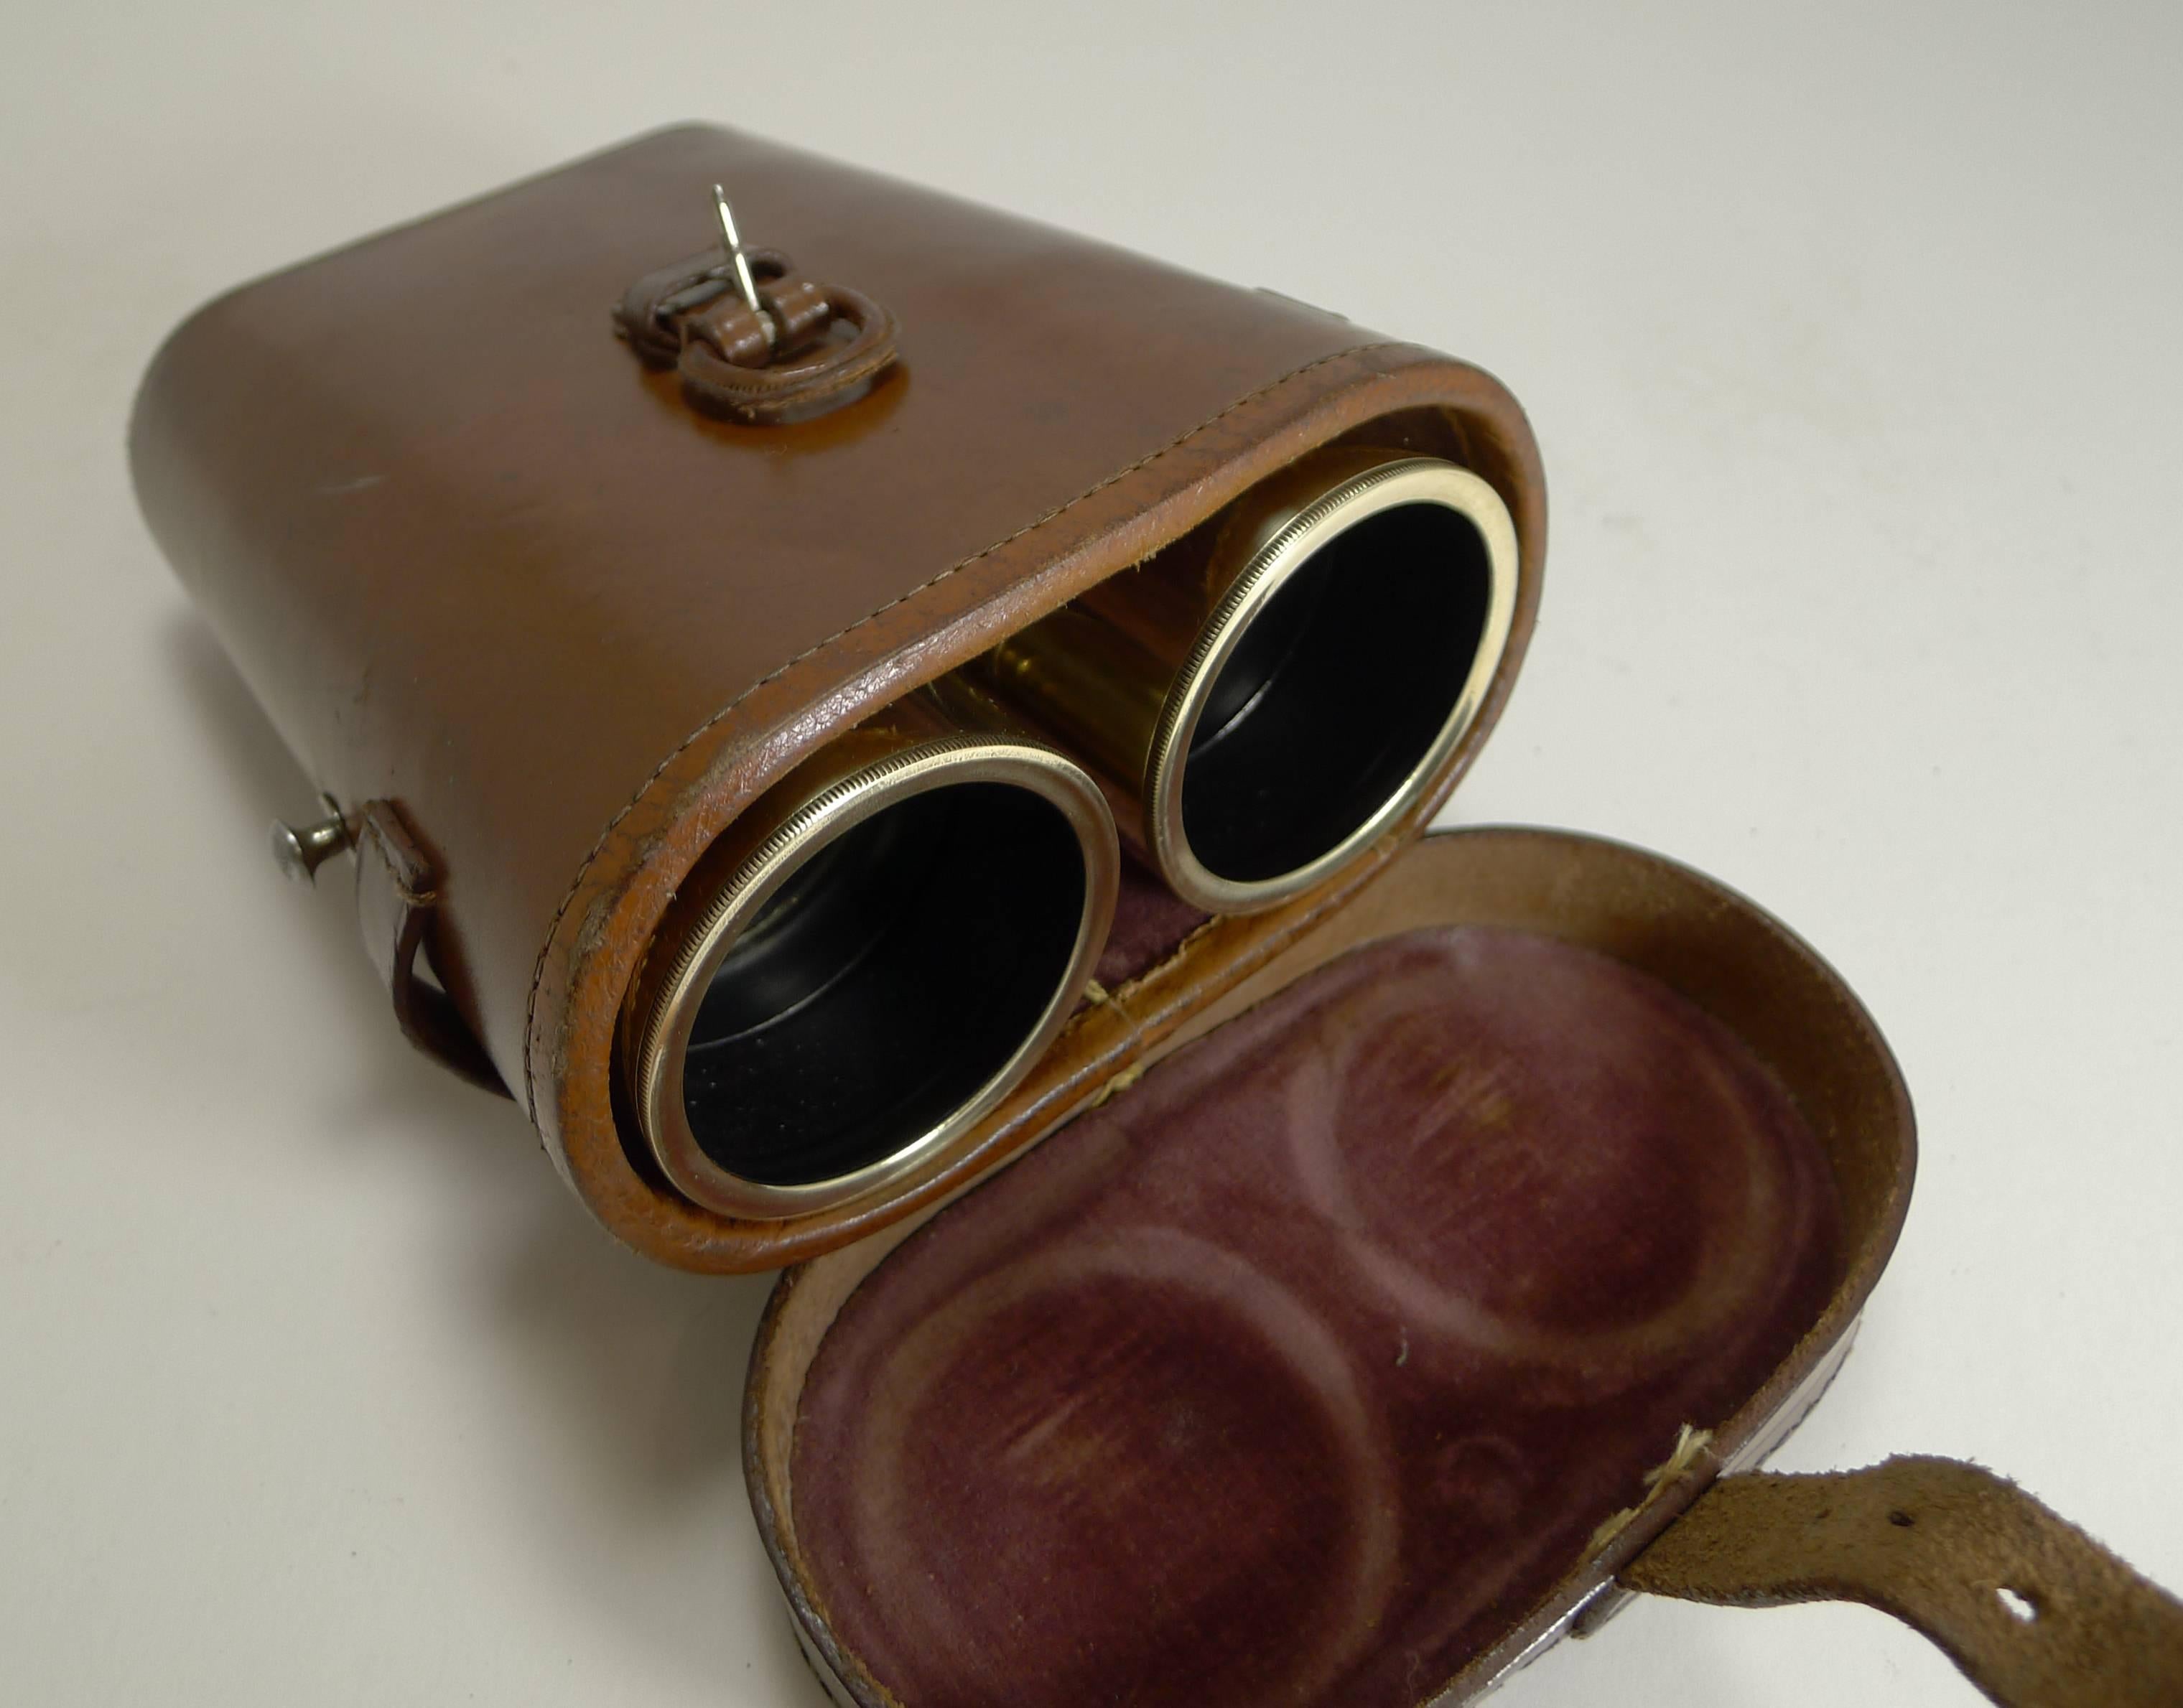 A handsome pair of British issued first world war leather and polished brass binoculars together with an excellent leather case. Possibly made in France, they were retailed in London by the famous Optician's 